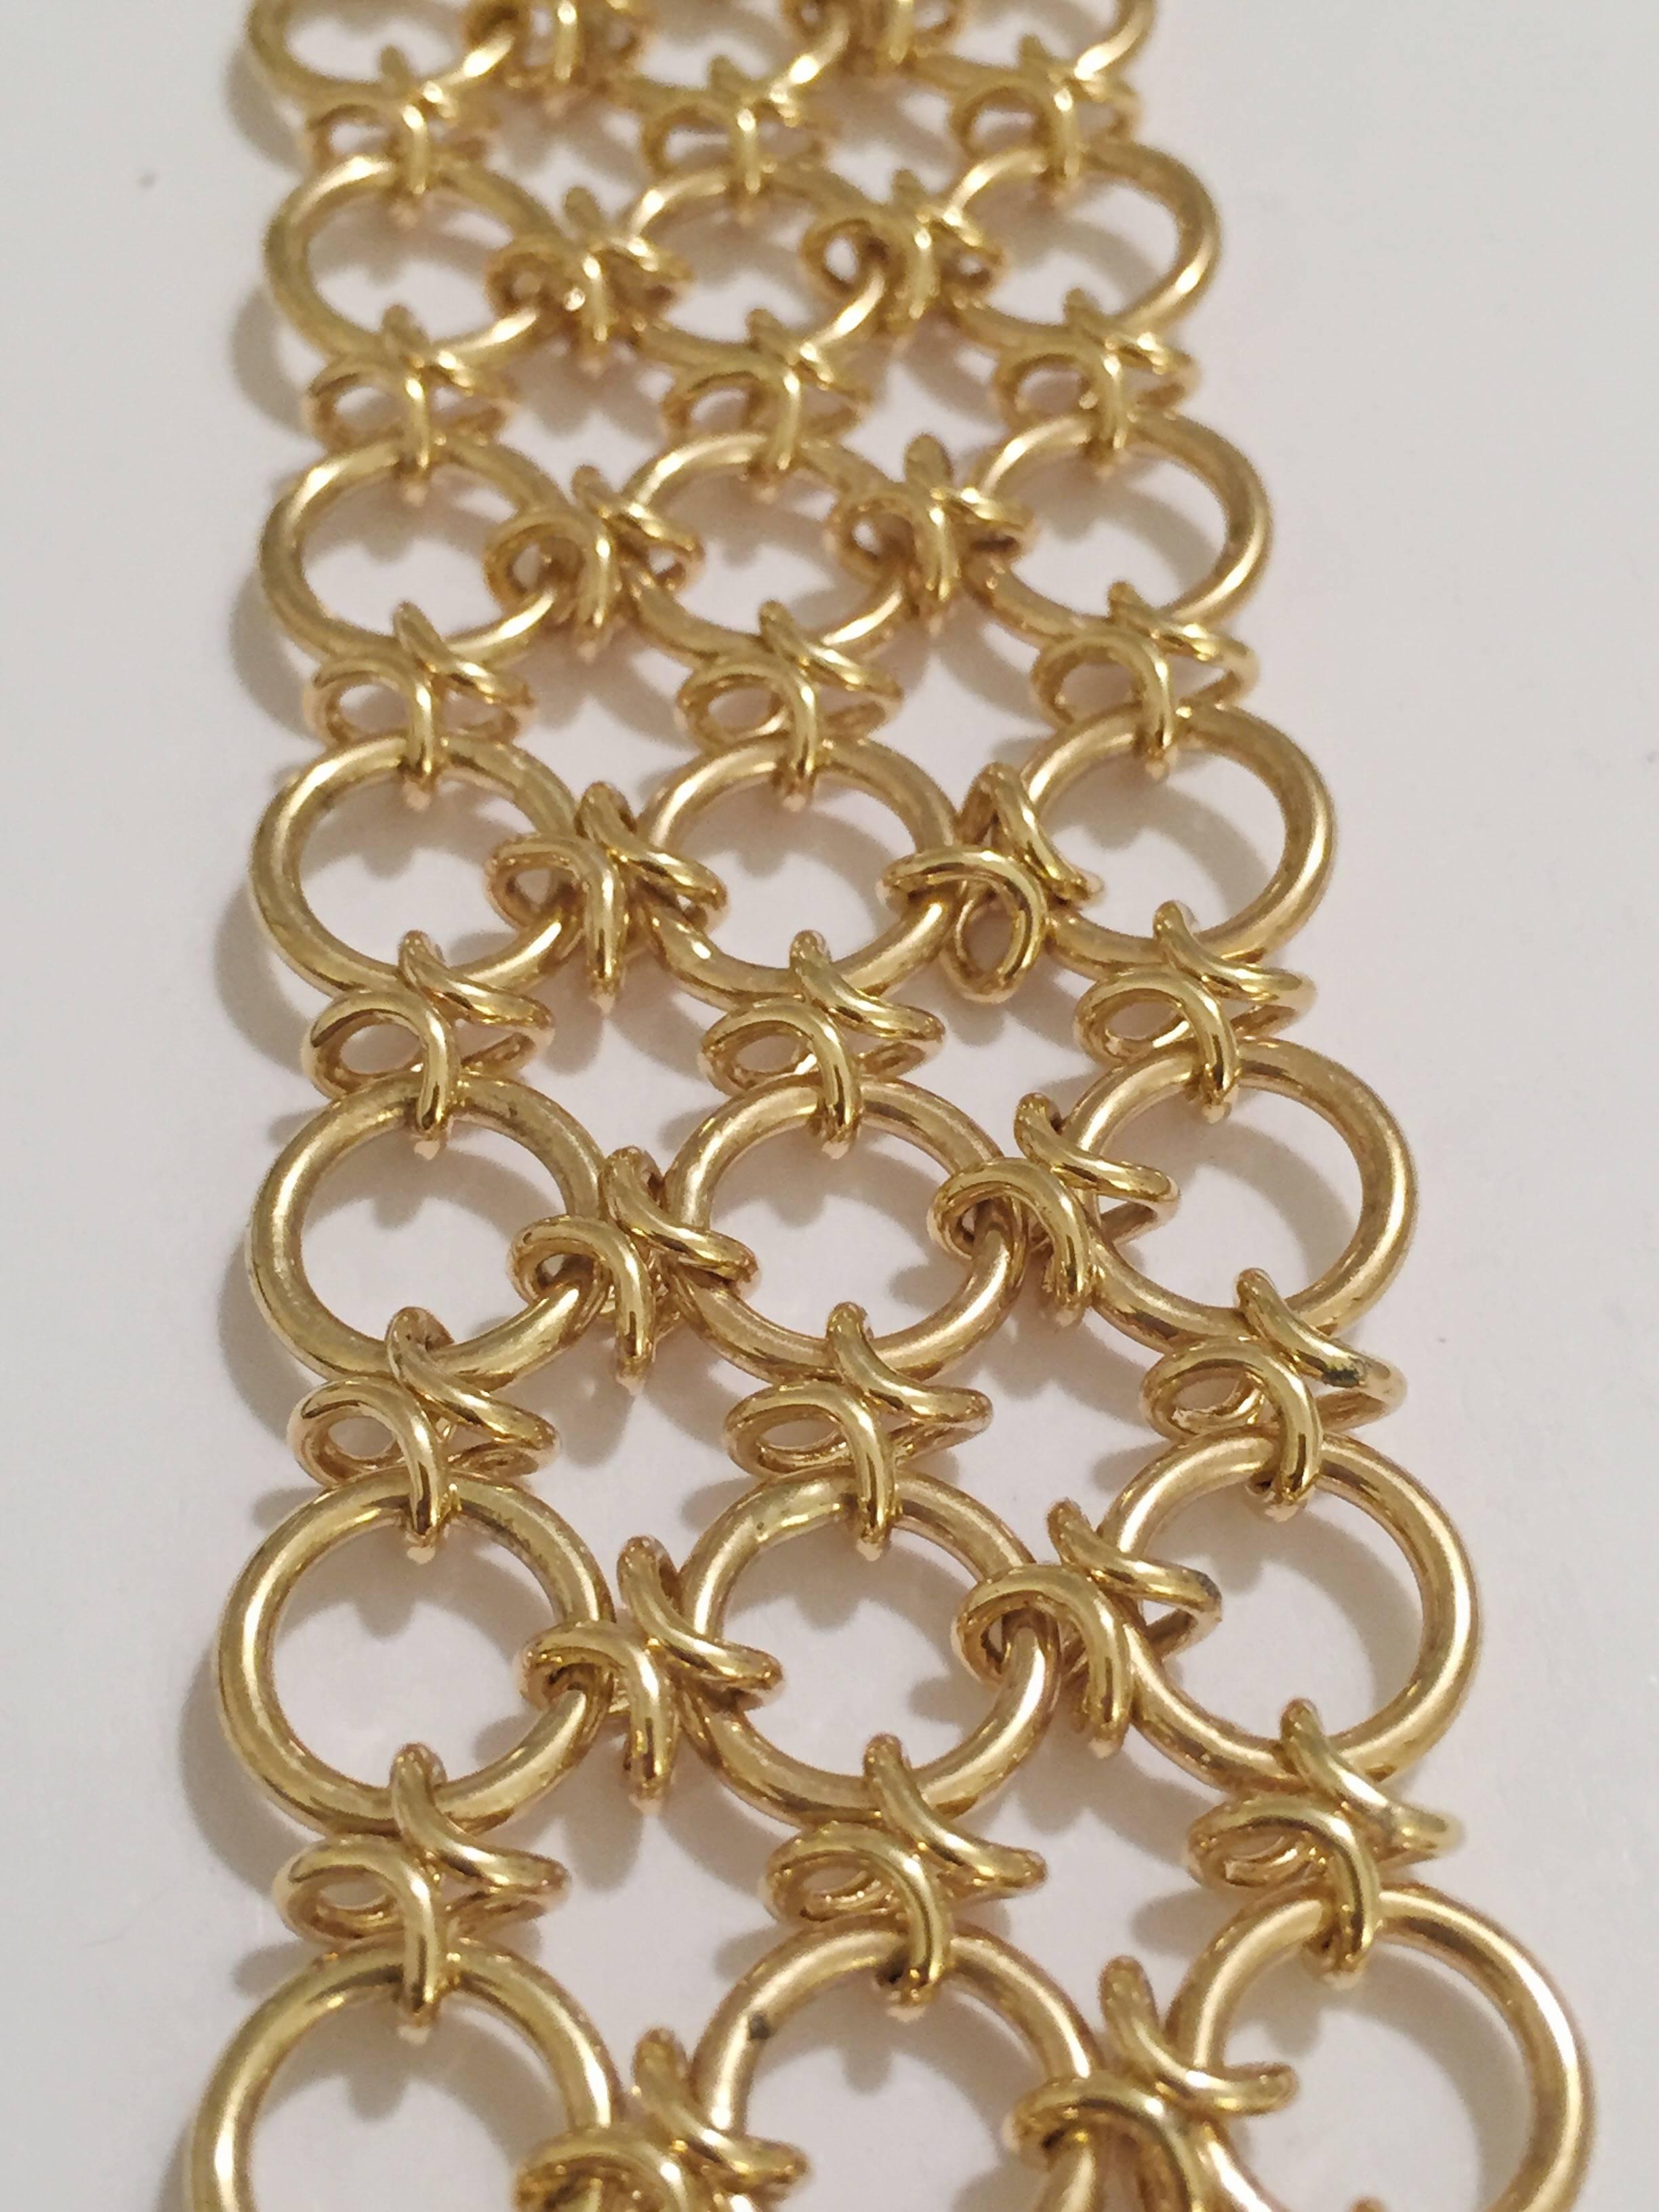 18kt Gold Three Row Circle Bracelet with circle shaped gold joints.  The elegant flexible bracelet measures just over 1.25